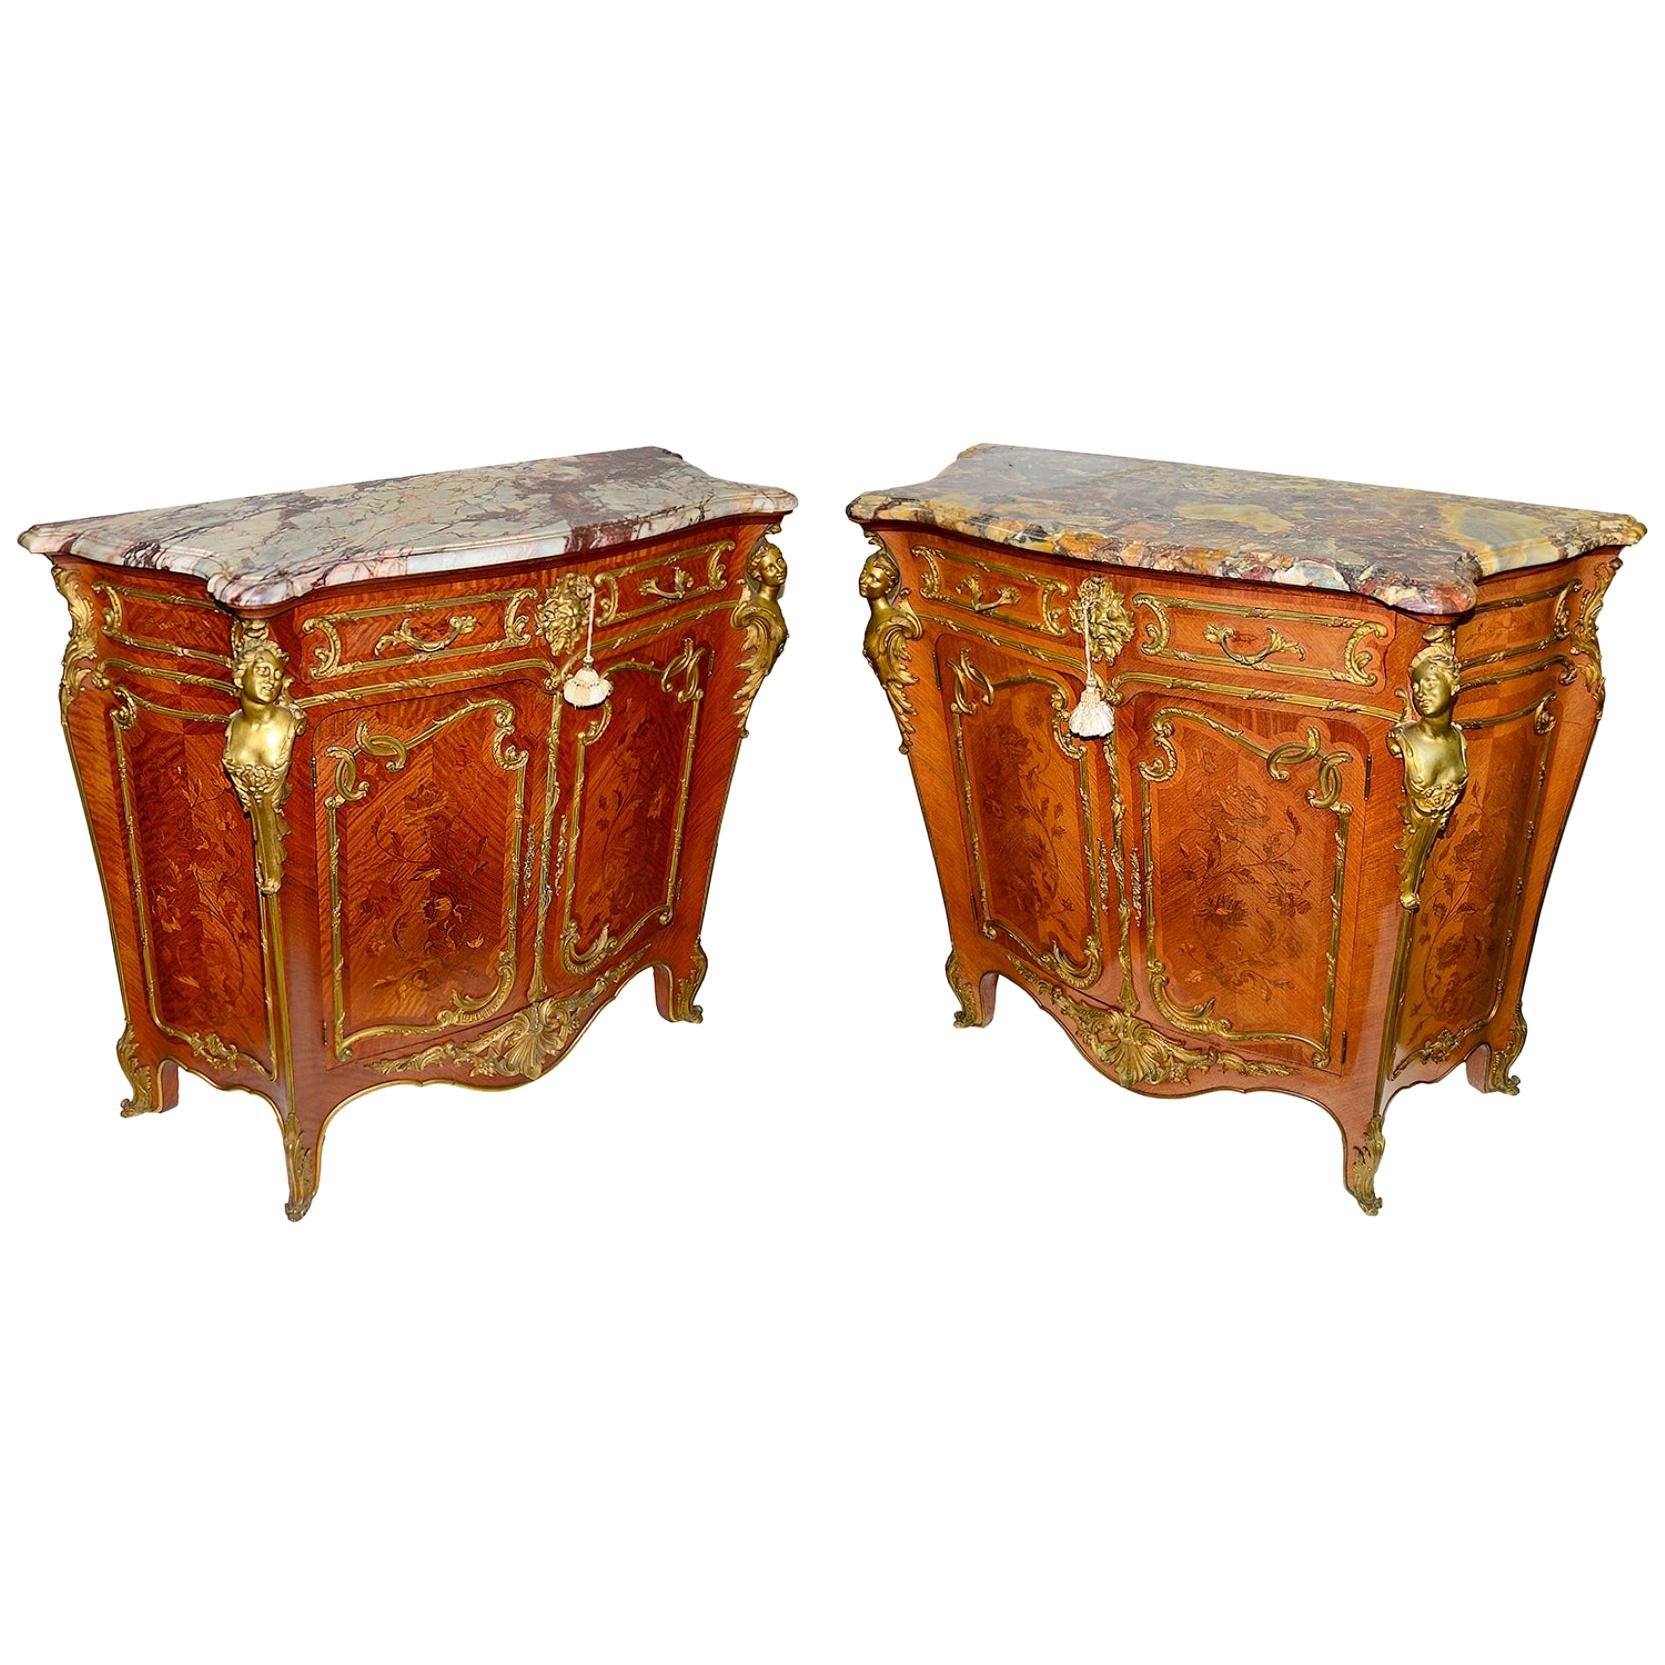 Rare Pair of Louis XVI Style Side Cabinets after Joseph Zwiener For Sale